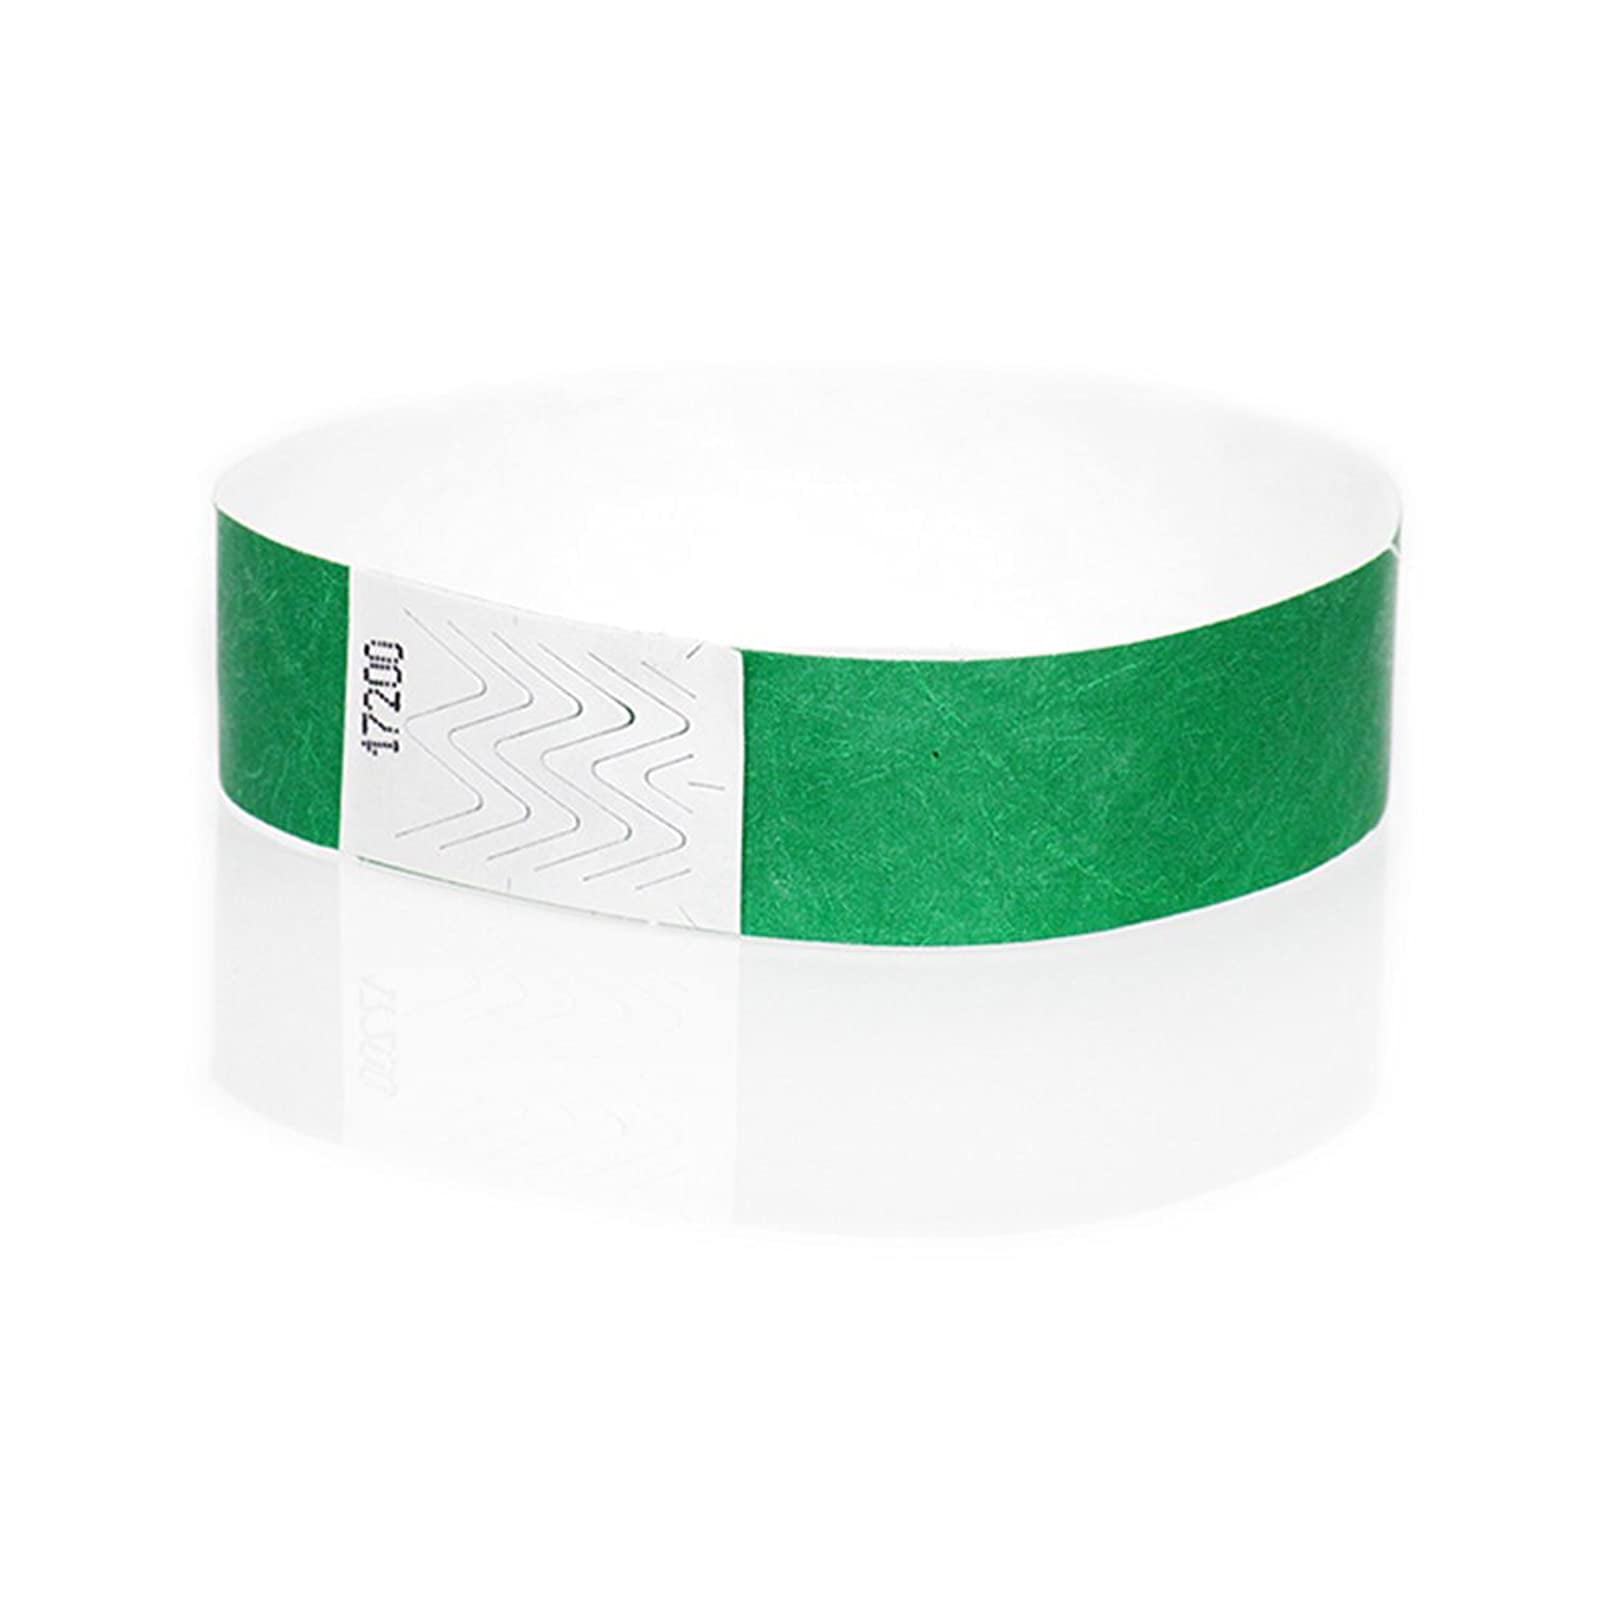 Cheap SALE Tyvek Wristbands Event Party Festival SecurityID consecutively number 